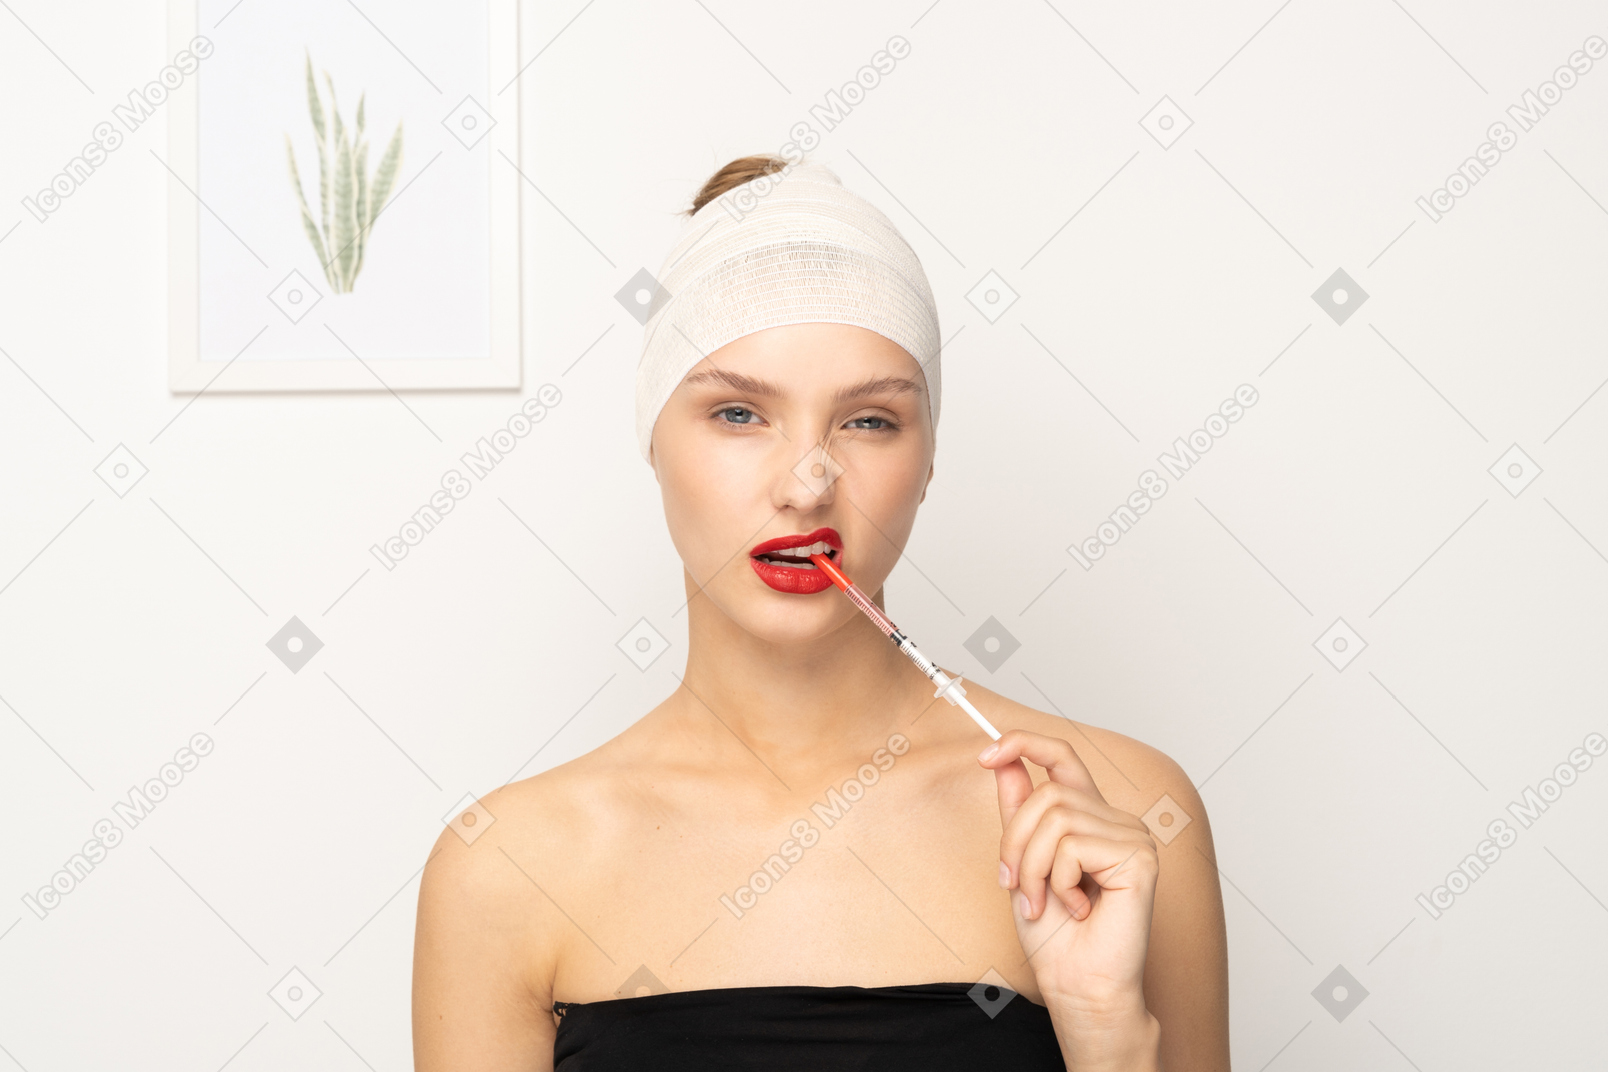 Portrait of a young woman biting syringe